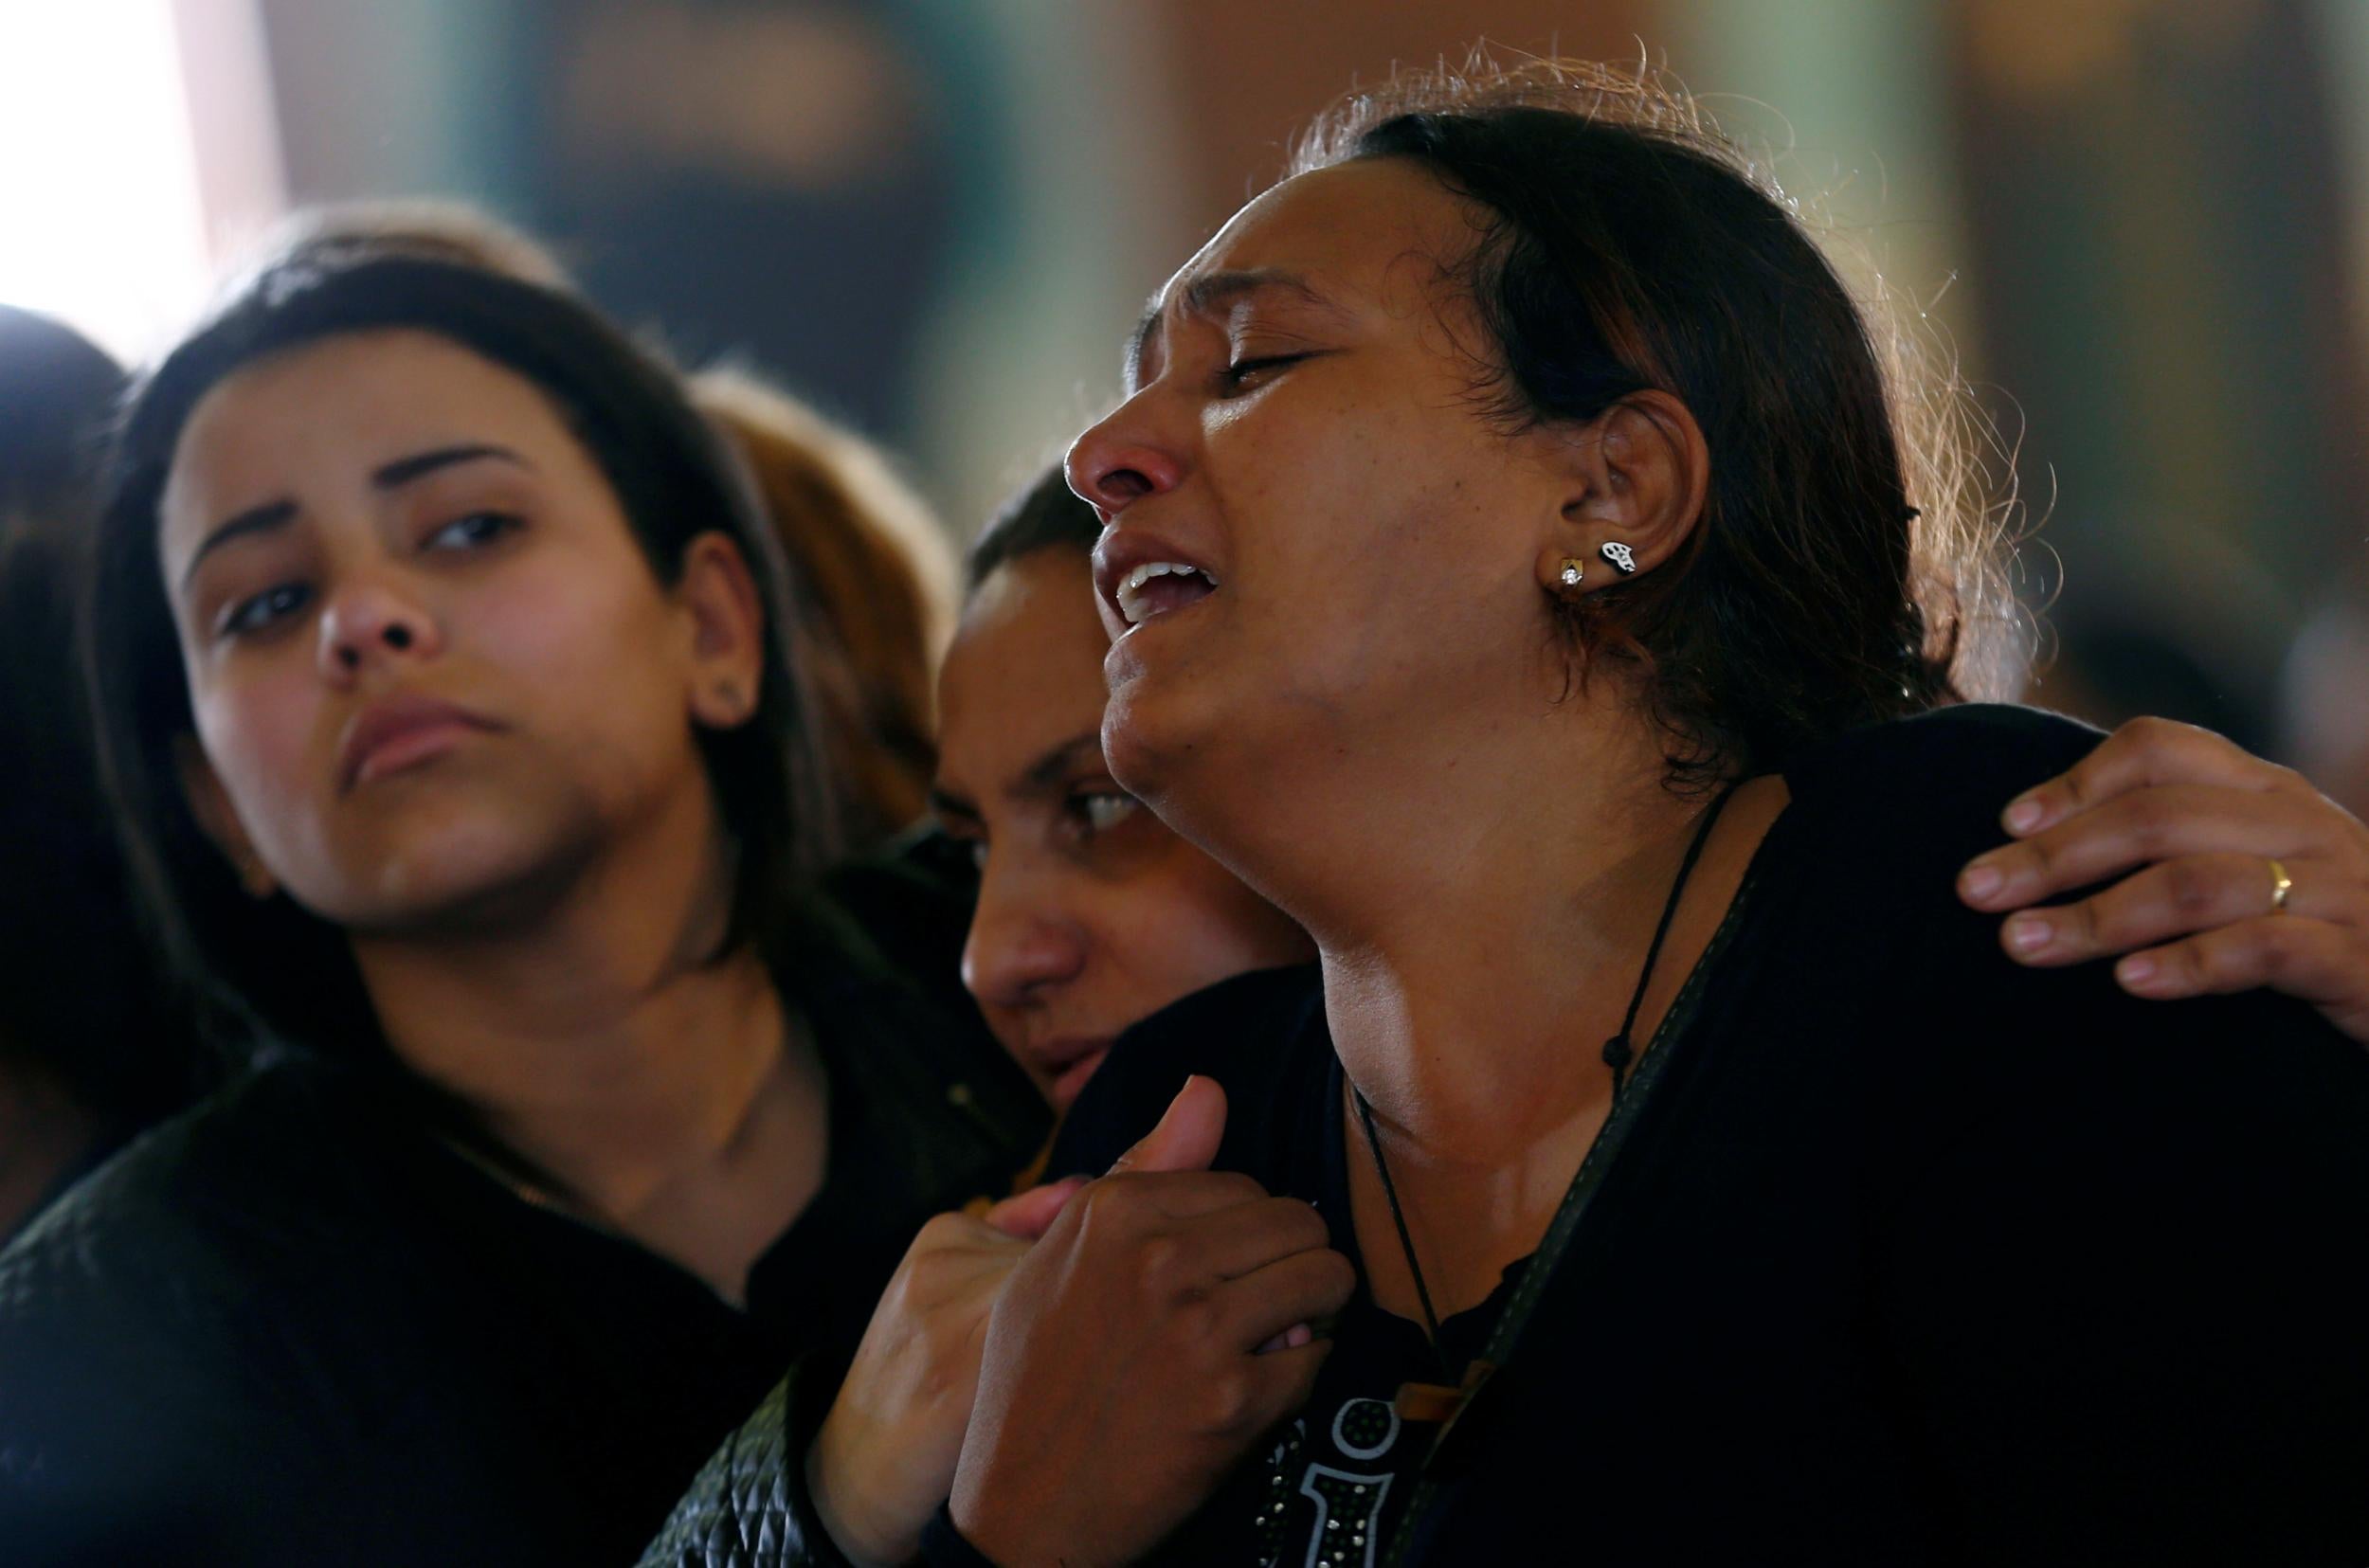 Relatives mourn for the victims of the Palm Sunday bombings during their funeral at the Monastery of Saint Mina in Alexandria, Egypt, on April 10, 2017